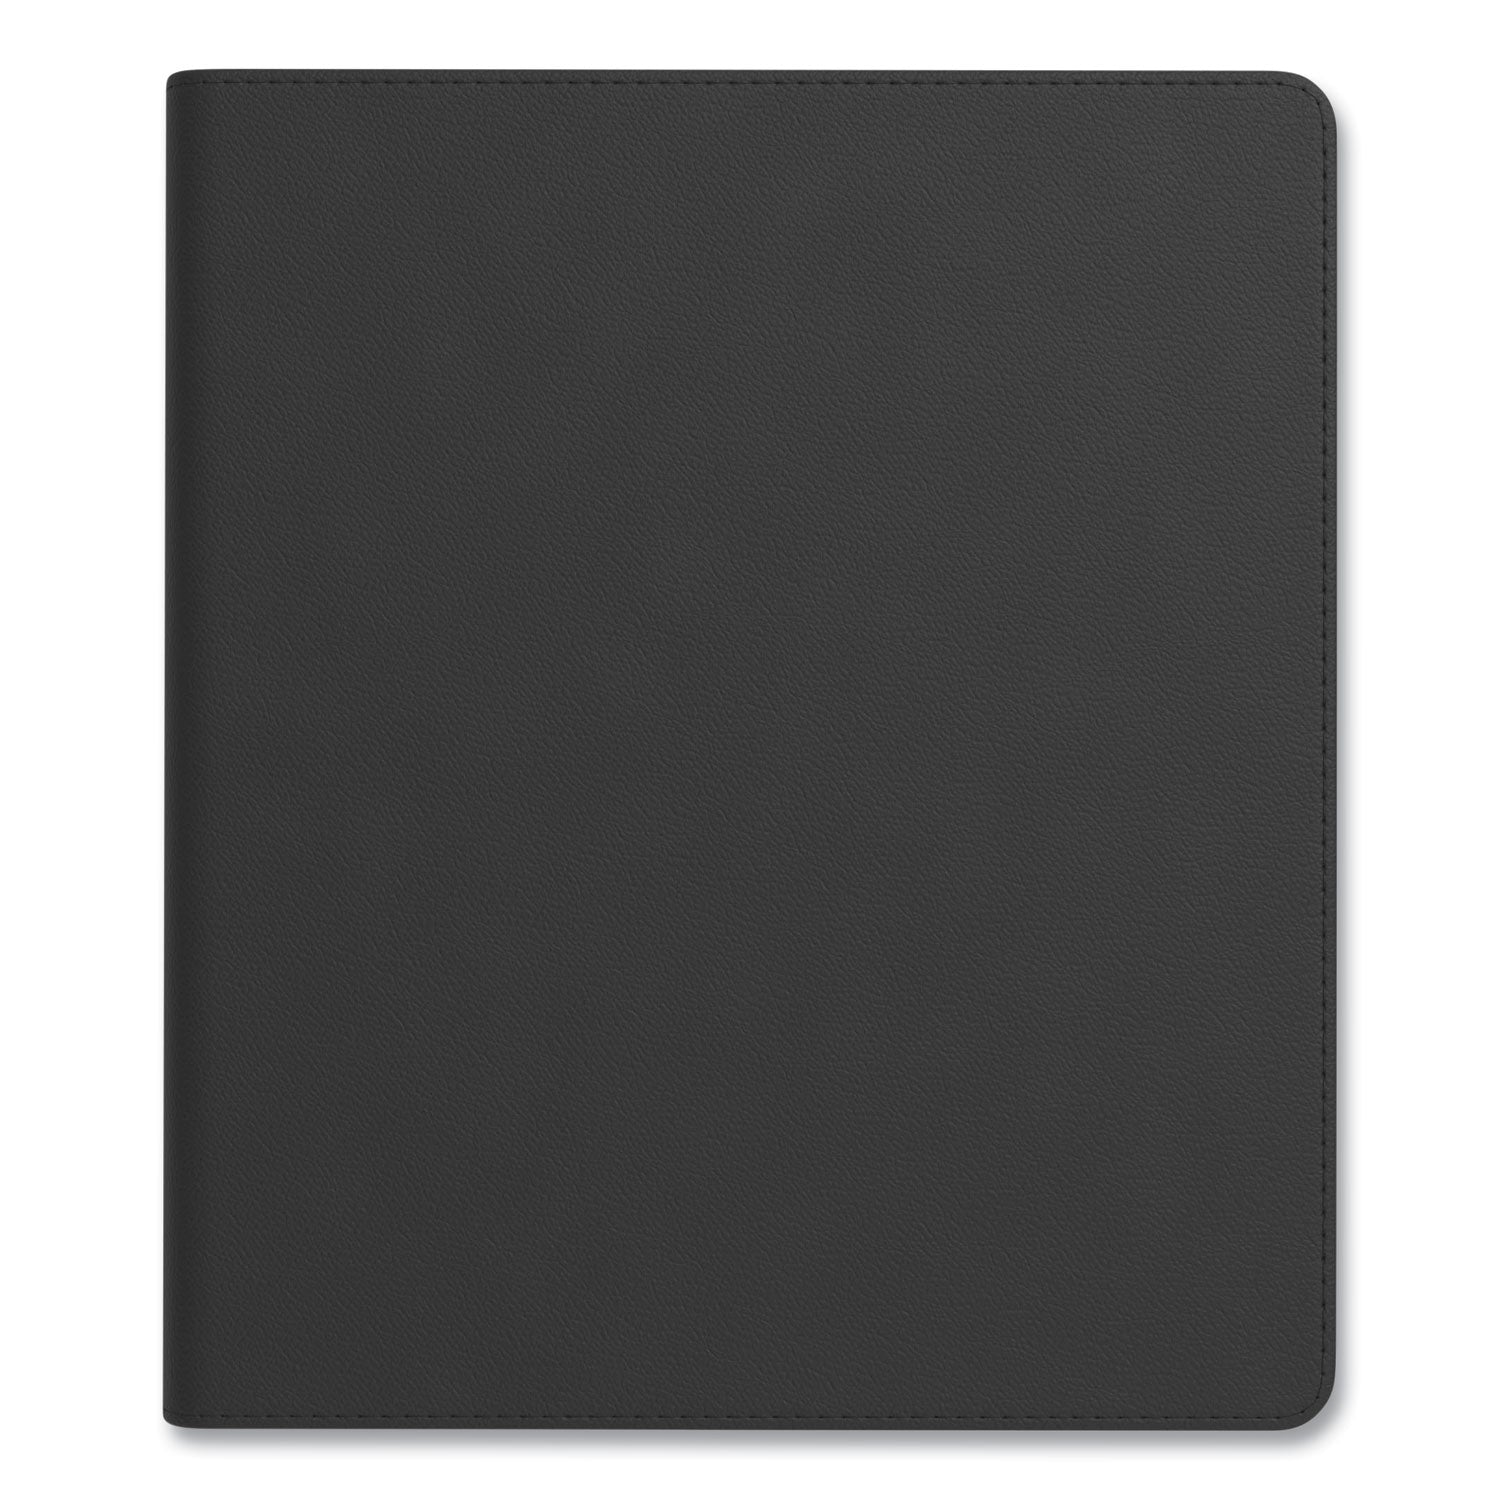 soft-cover-notebook-folio-set-1-subject-narrow-rule-black-cover-80-11-x-85-sheets_tud24377280 - 4